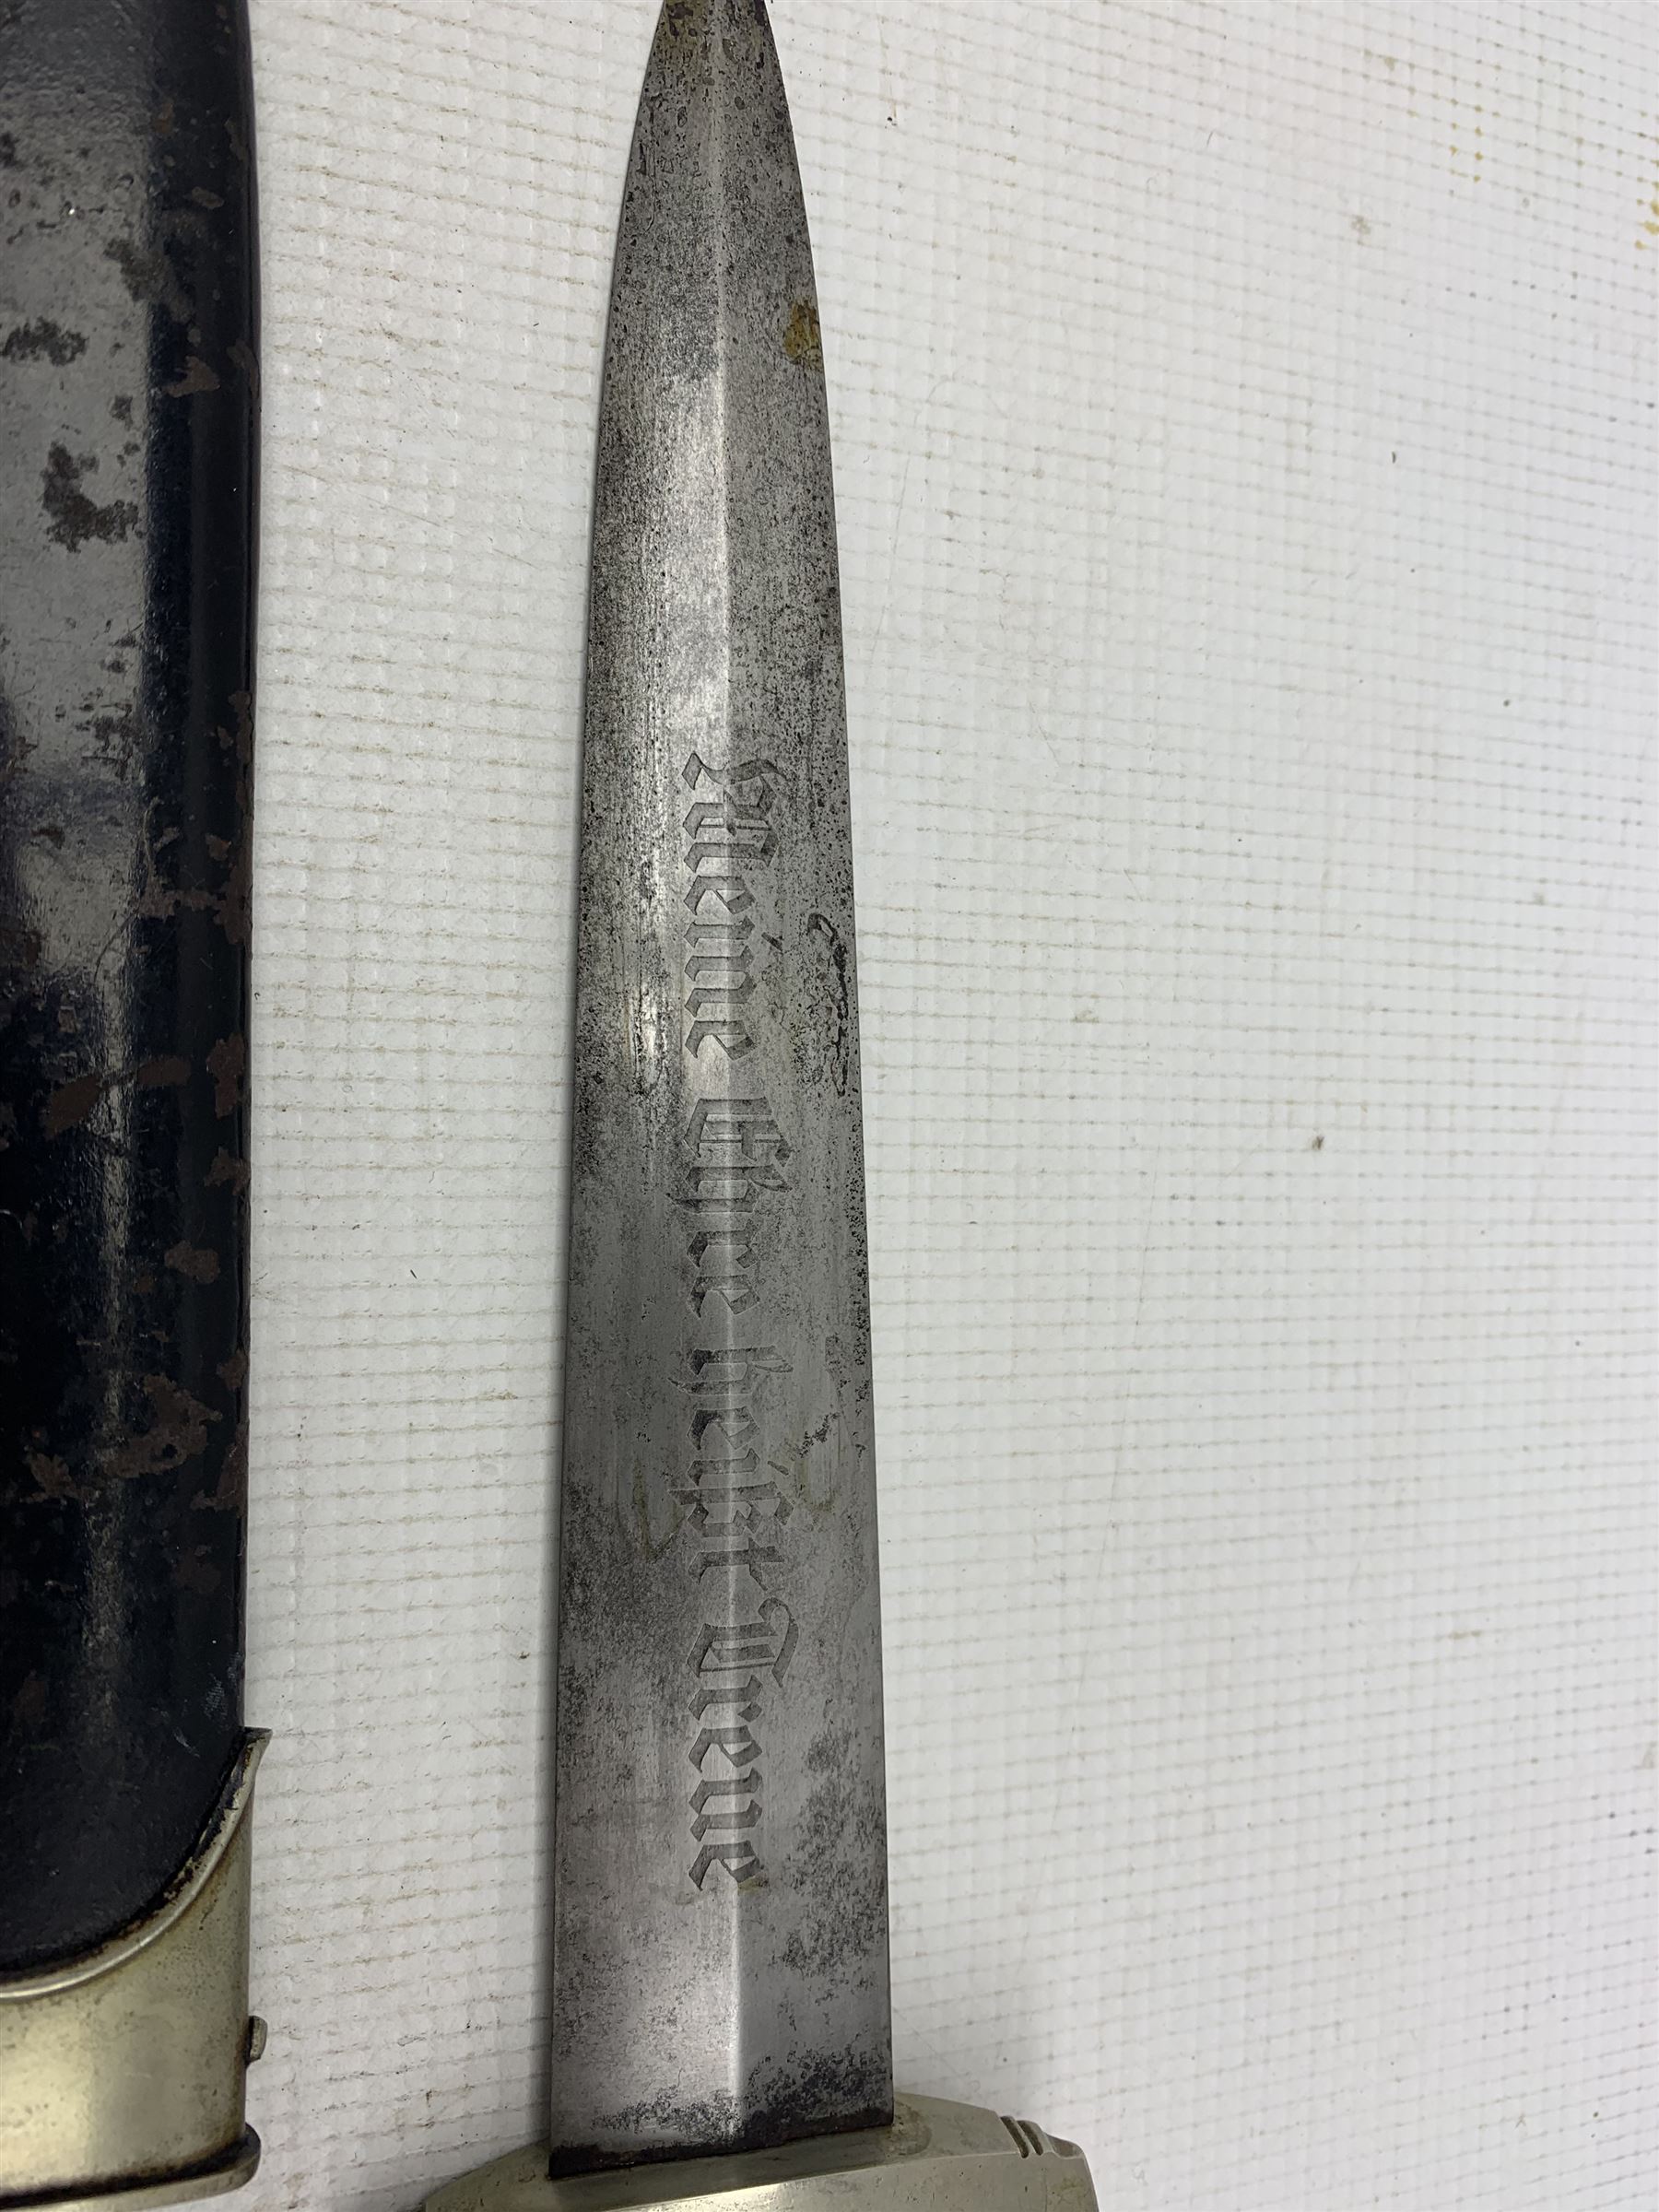 Replica German Third Reich SS dagger the blade engraved 'Meine Ehre heist Treue' and with RZM code f - Image 2 of 4